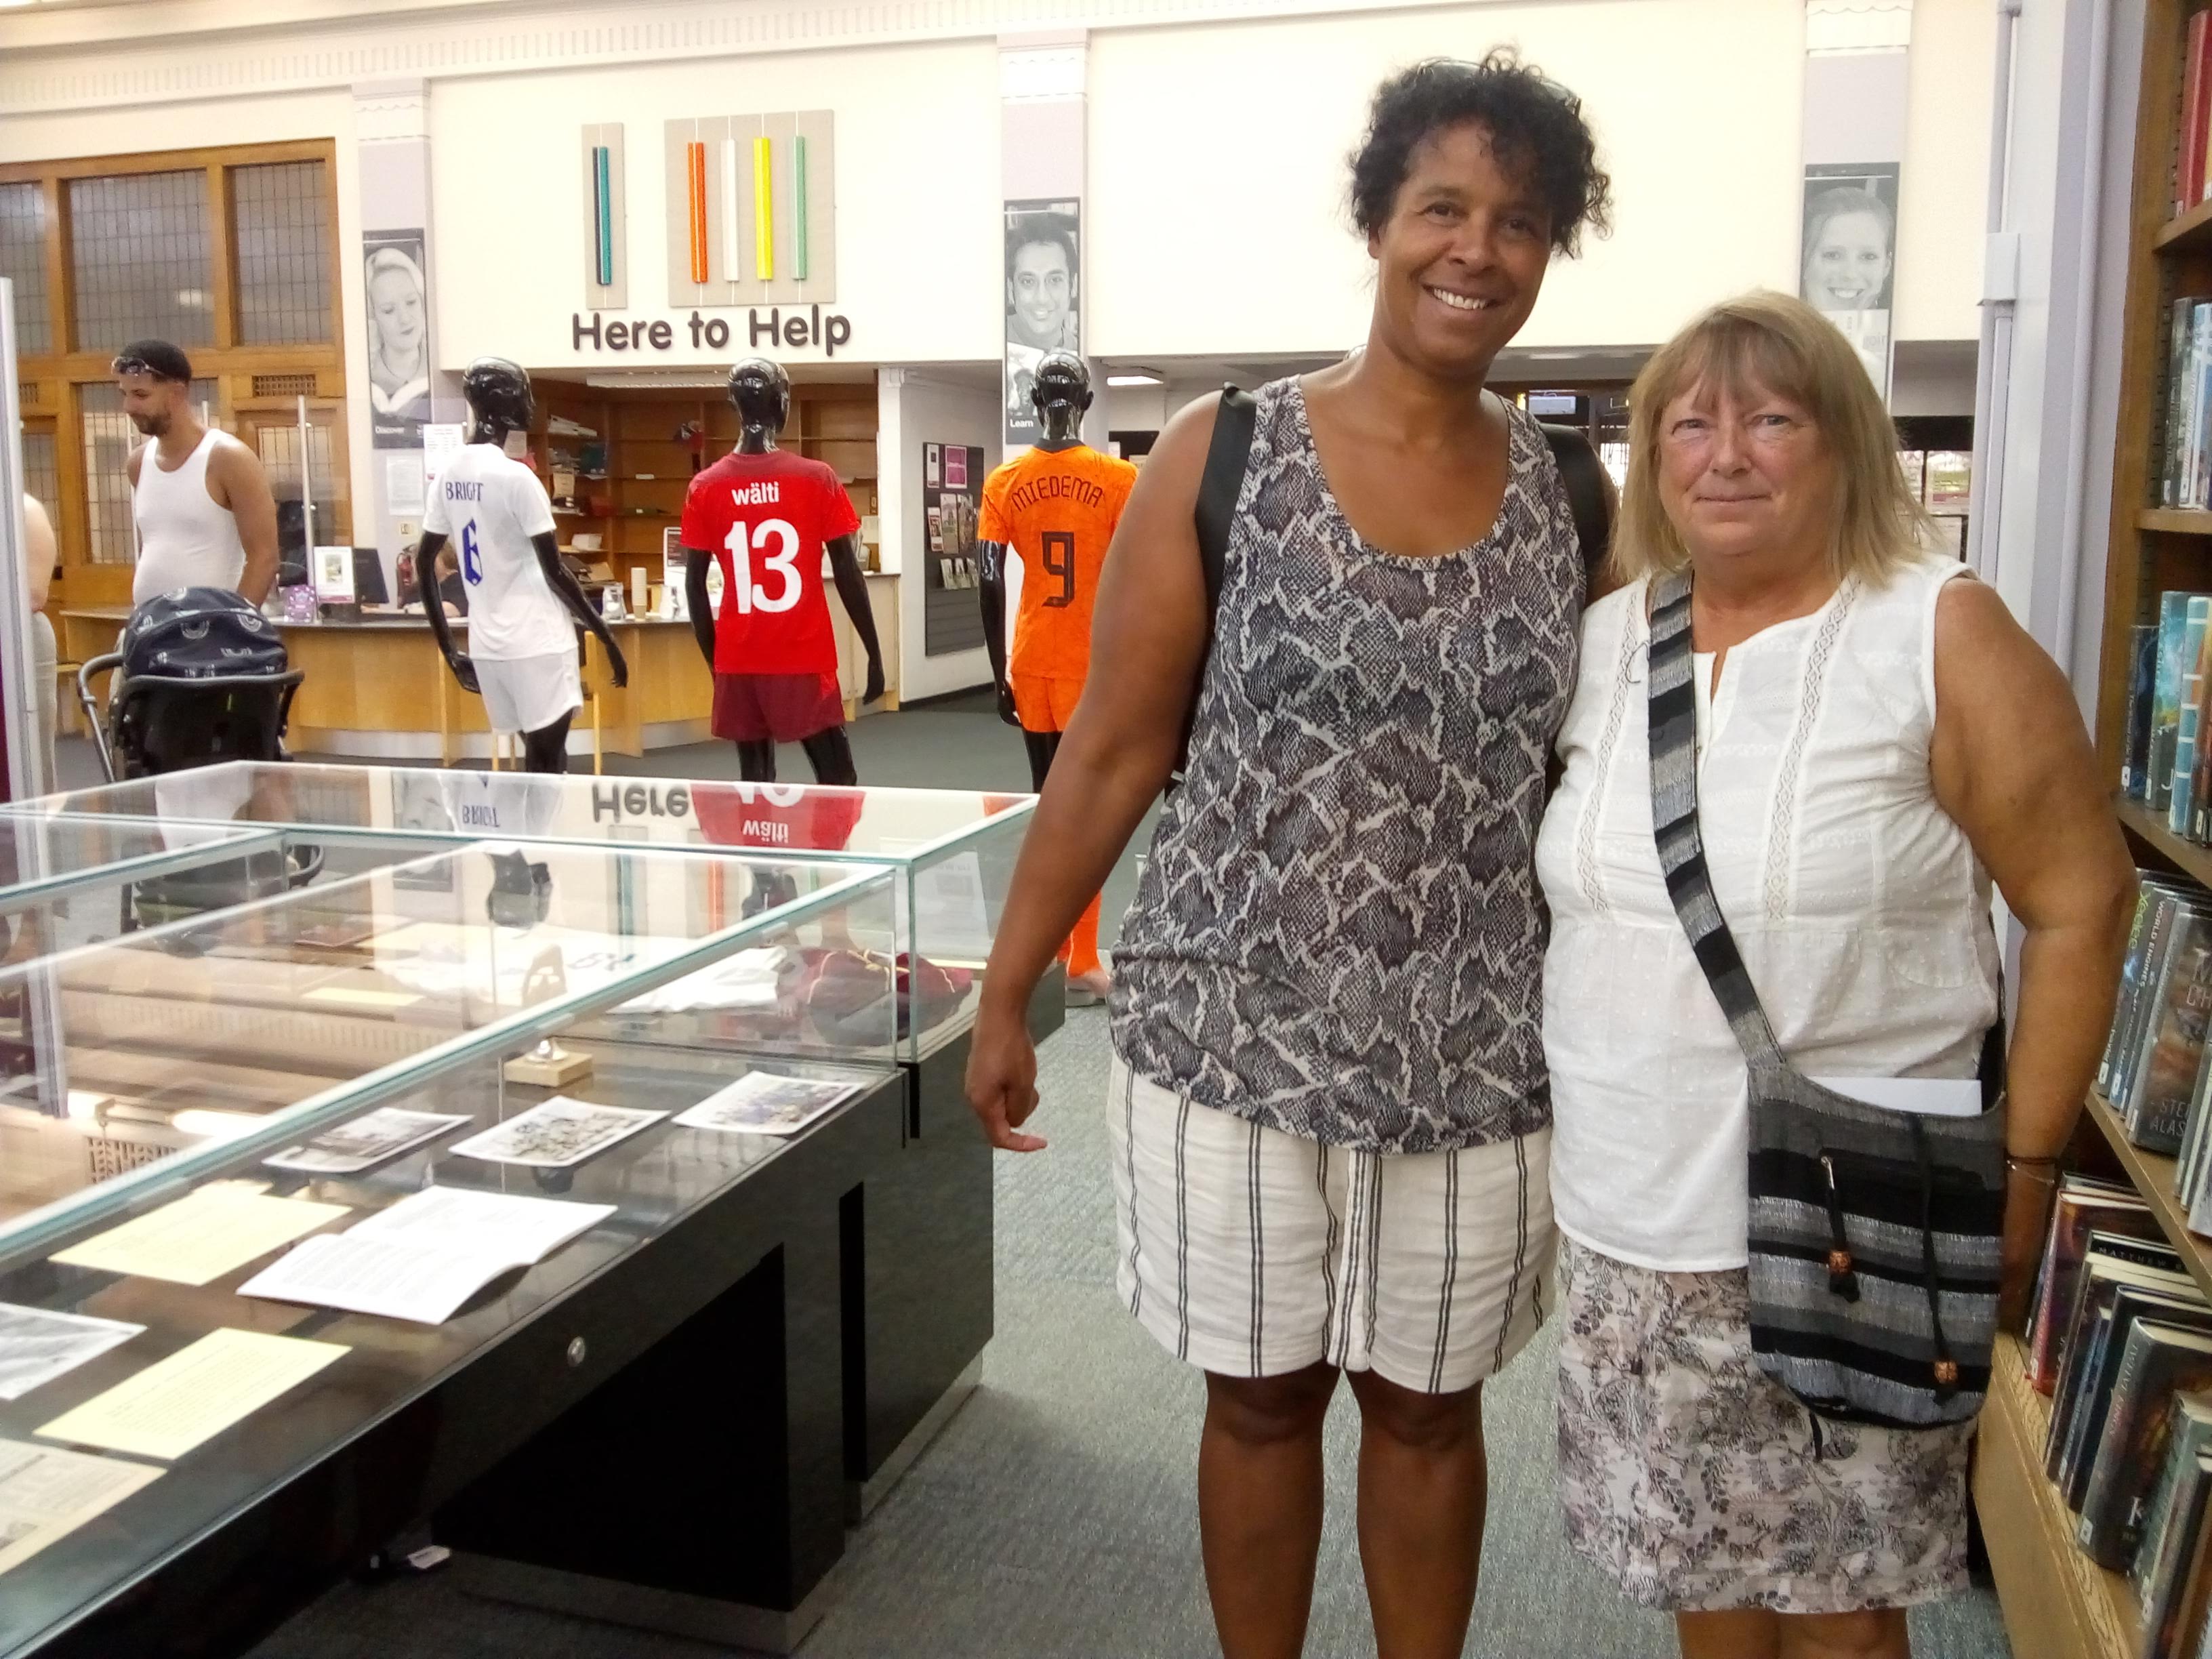 Michele Suleman and Bev Hague at the exhibition launch - Two loaners of memorabilia, Michele Suleman and Bev Hague at the Stoppage Time exhibition launch 18th July 2022.